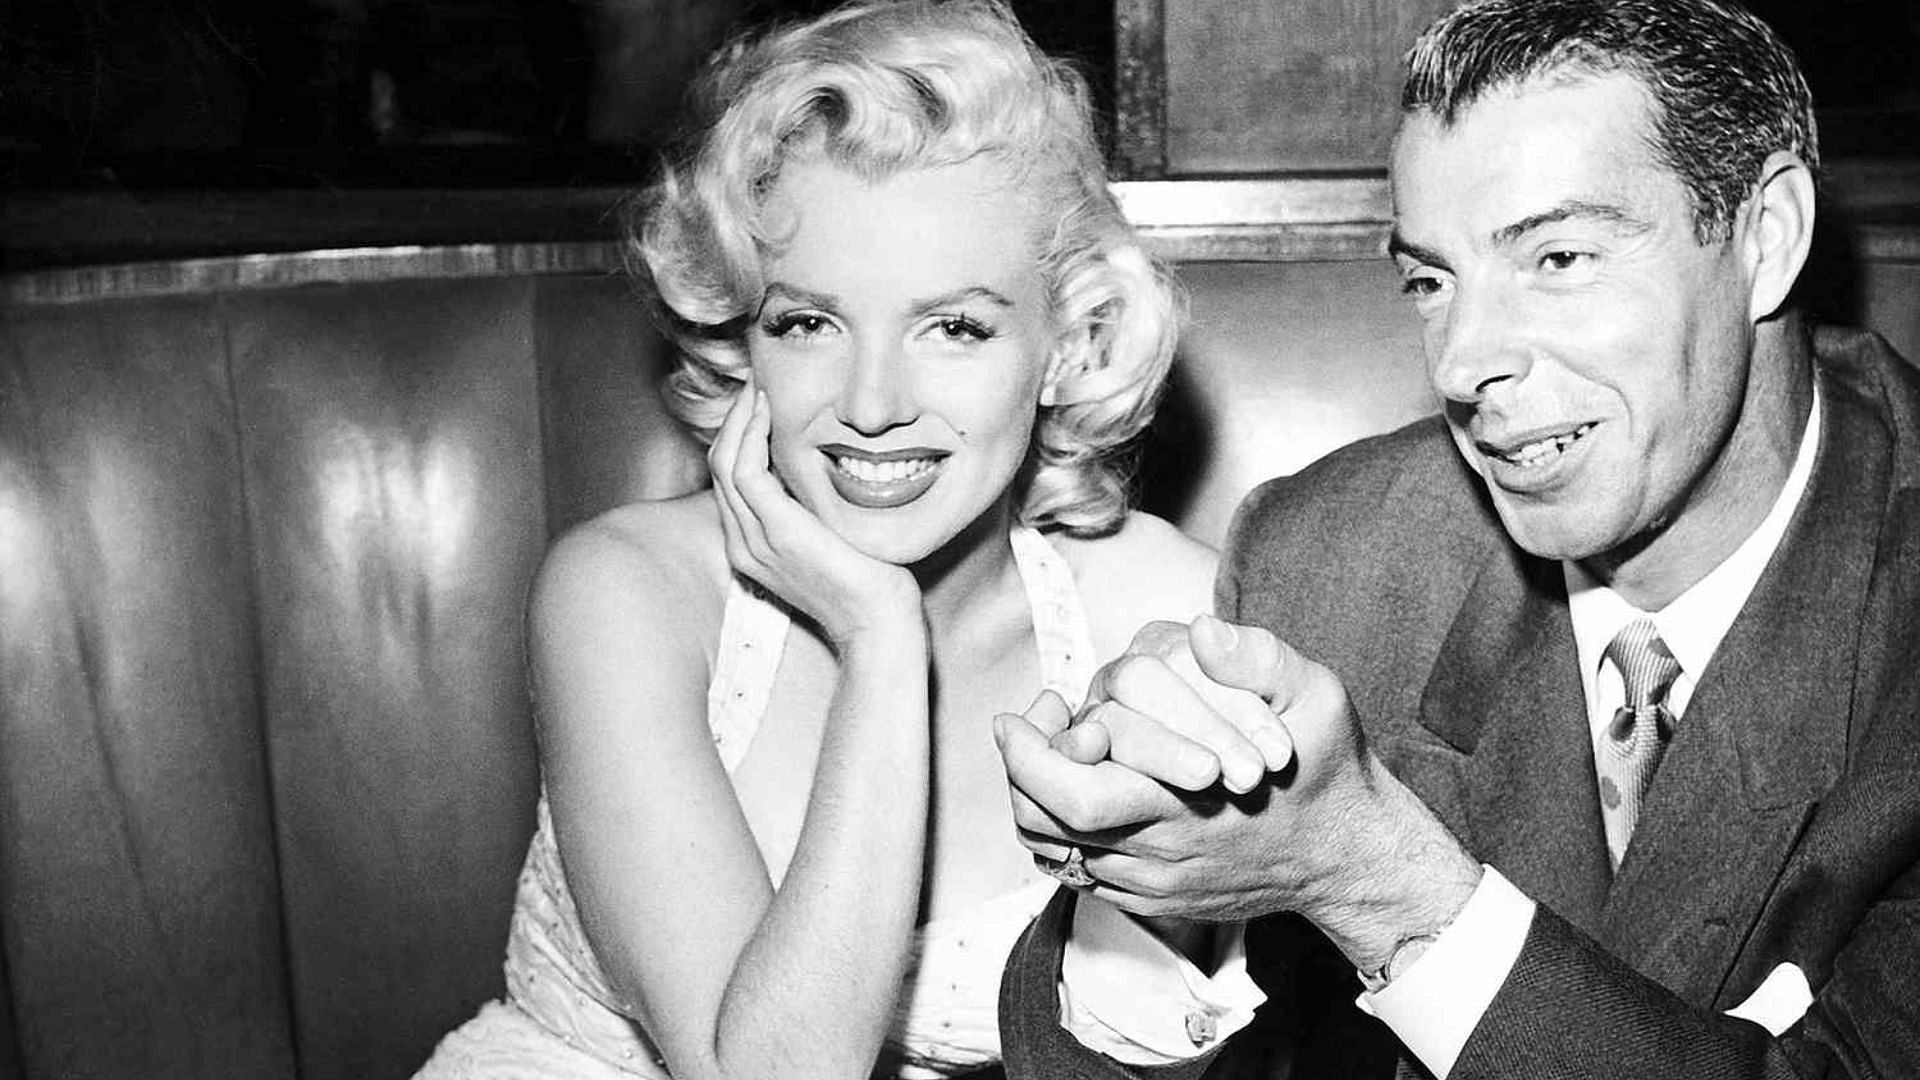 Hollywood icon, Marilyn Monroe with World Series champion and Yankees icon, Joe DiMaggio. (Source: People.com)